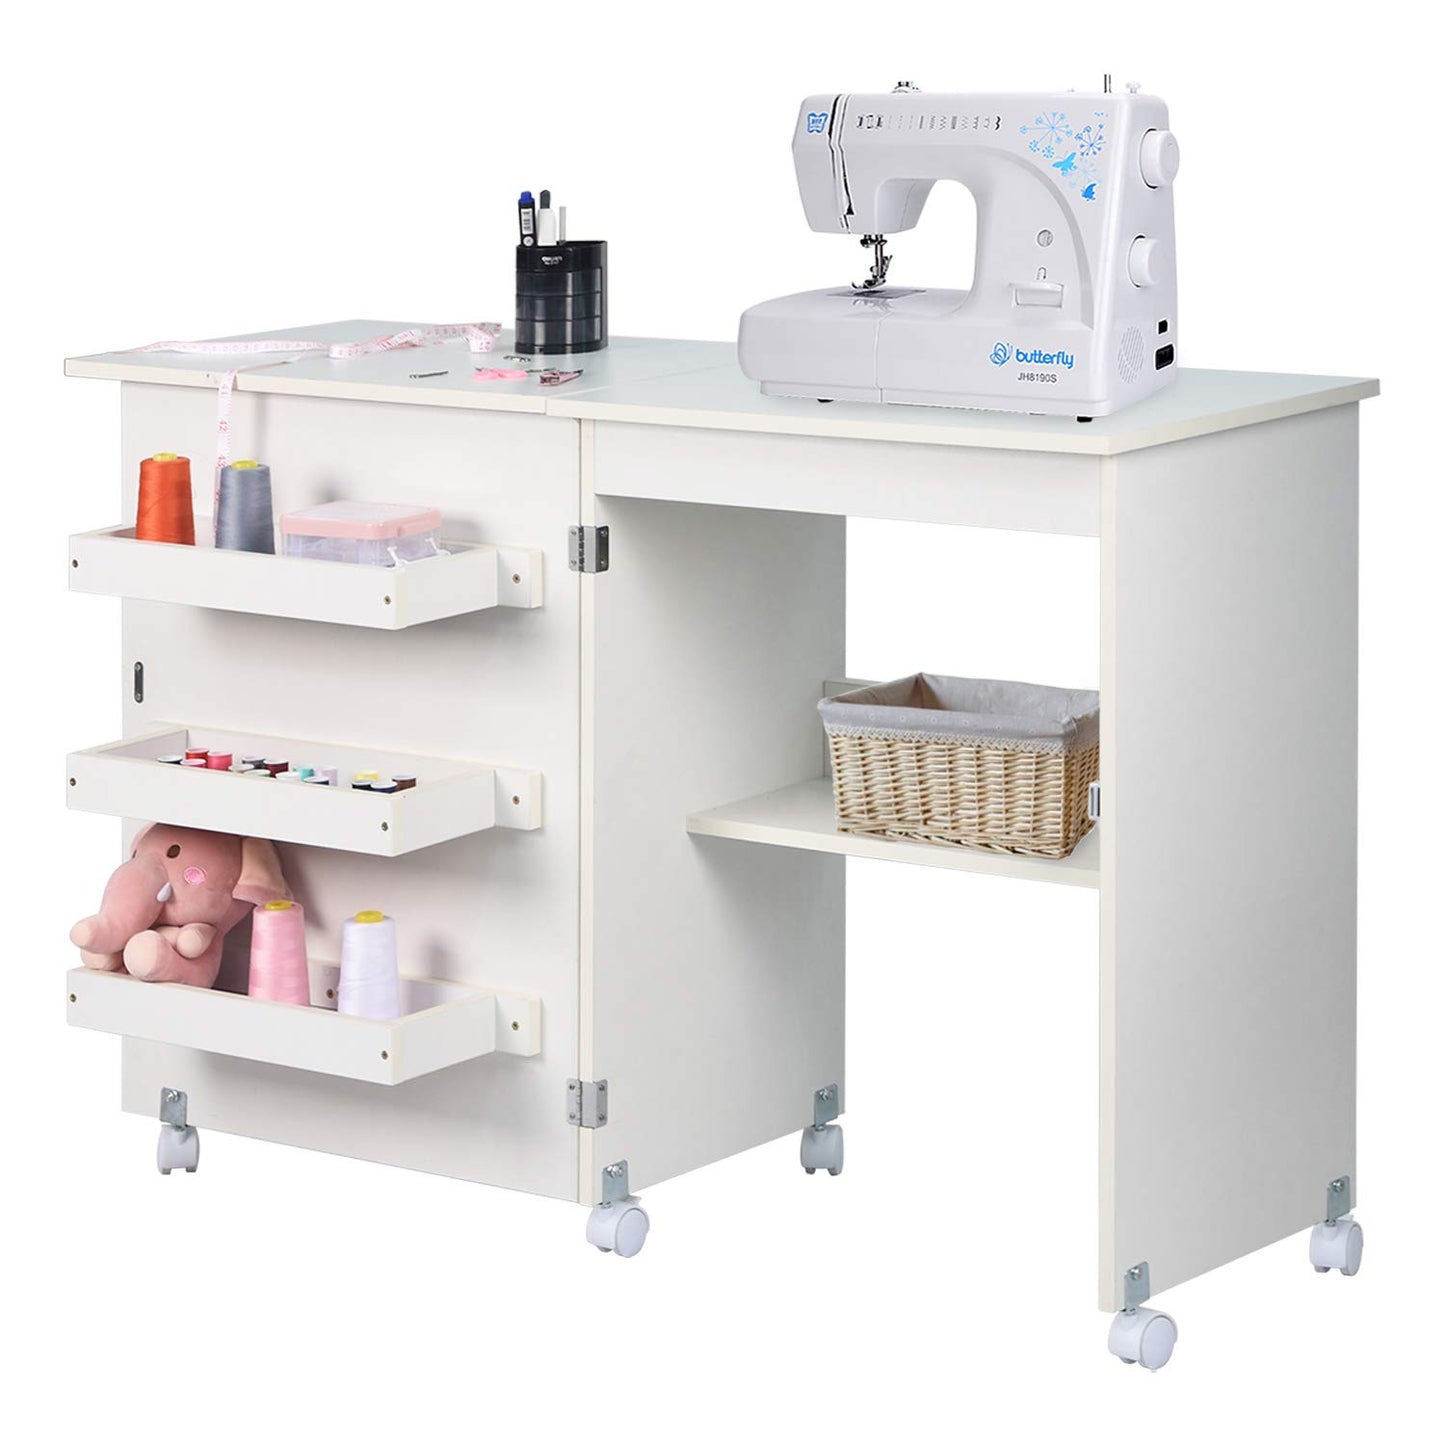 NSdirect Sewing Table, Folding Sewing Craft Cart&Sewing Cabinet Miscellaneous Sewing Kit Art Desk with Storage Shelves and Lockable Casters,(White)